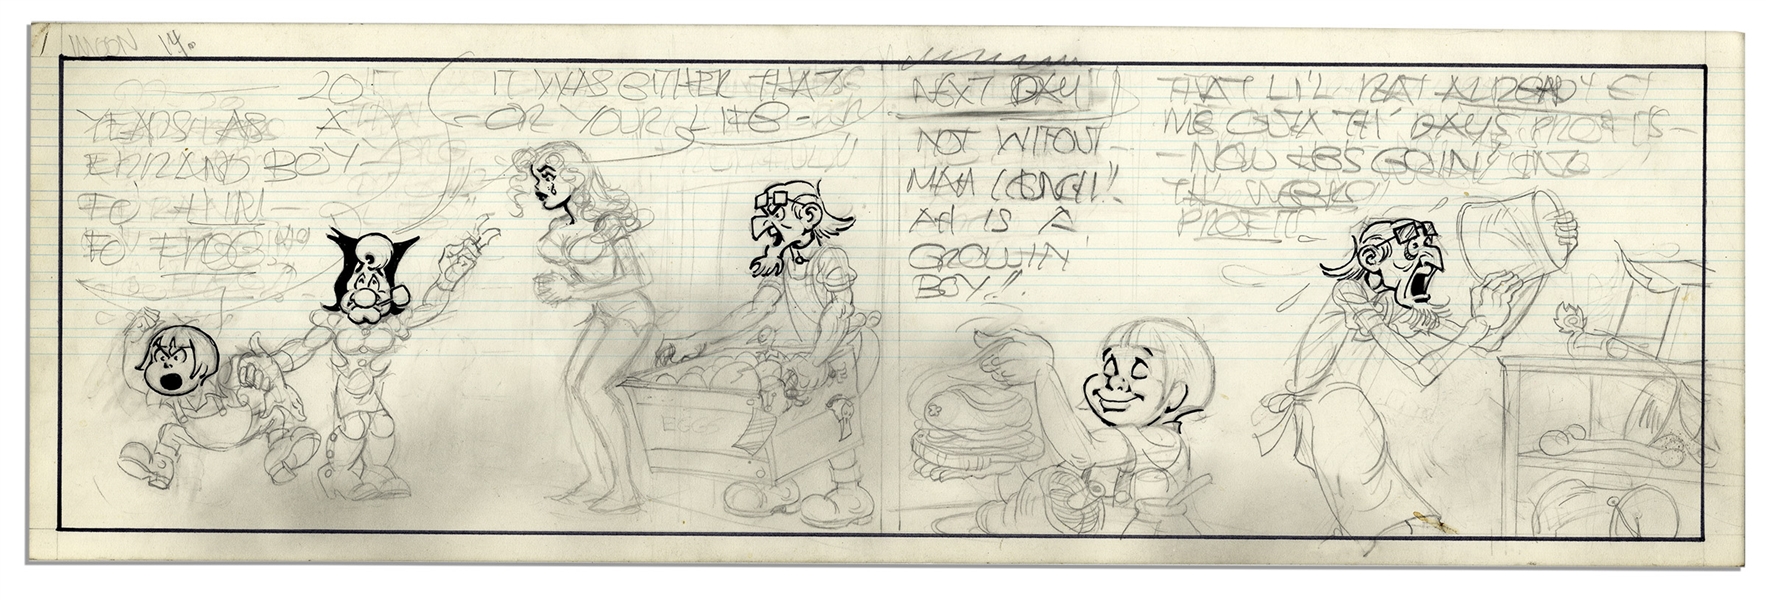 Unfinished Comic Strip by Al Capp in Pencil & Ink -- Undated Strip Features Mammy & Pappy Yokum, Daisy Mae & Honest Abe -- 19.5'' x 6.25'' -- Very Good -- From the Al Capp Estate